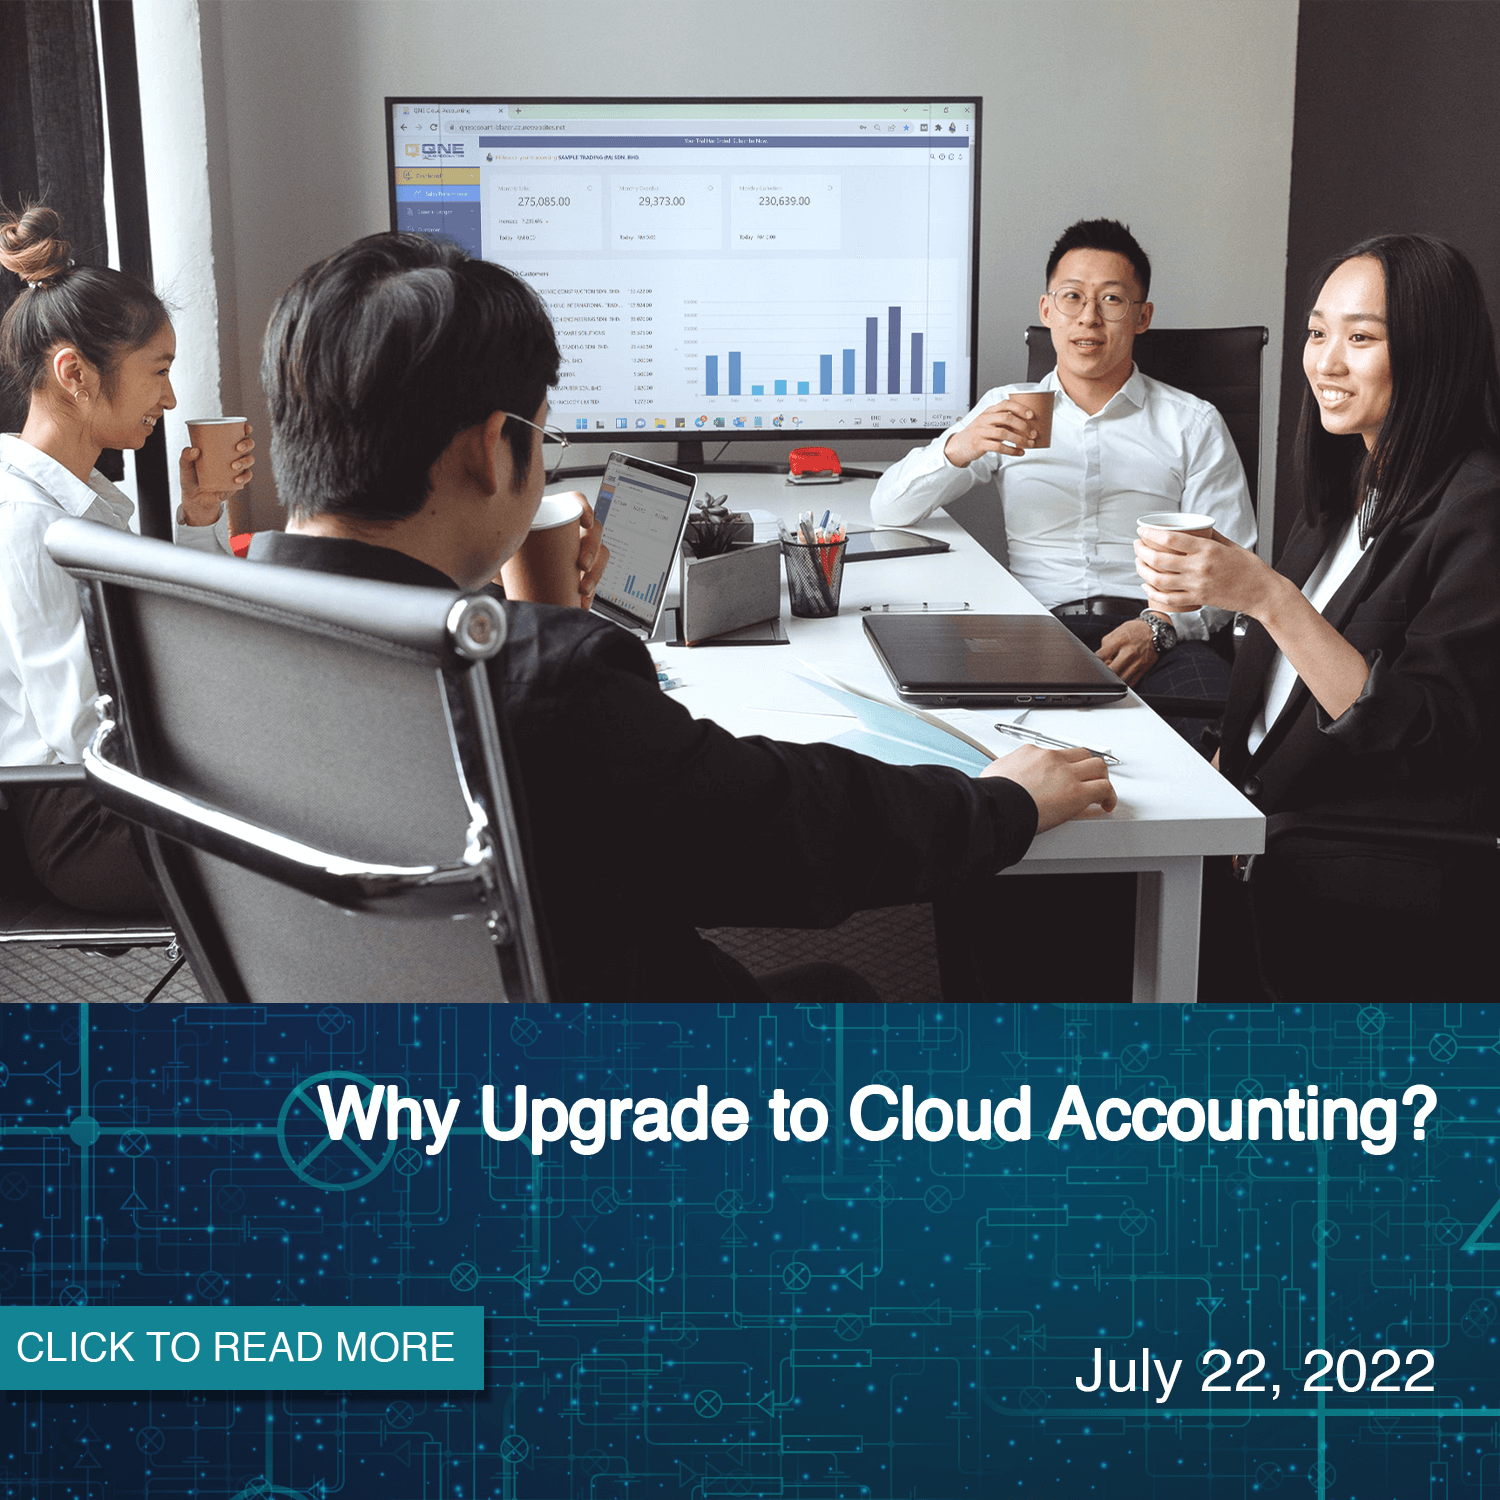 Why Use Cloud Accounting?